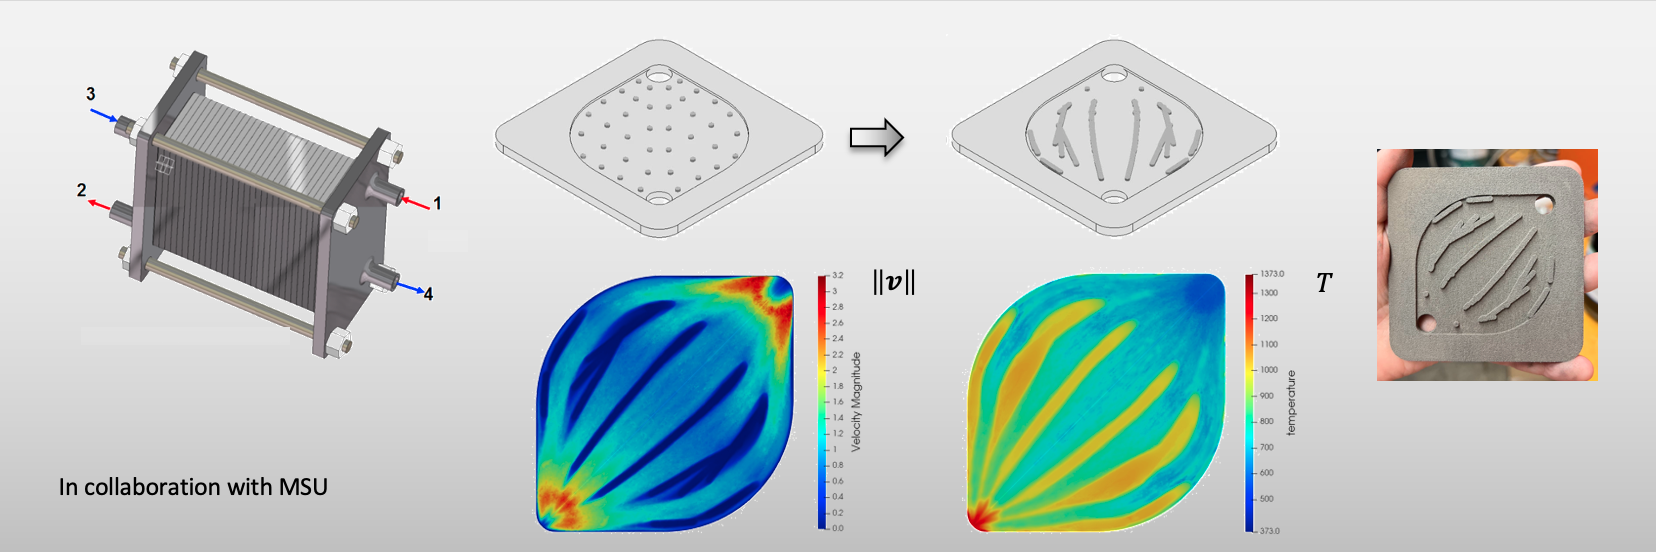 This slide shows an example of topology optimization to design the flow structures for a plate heat exchanger